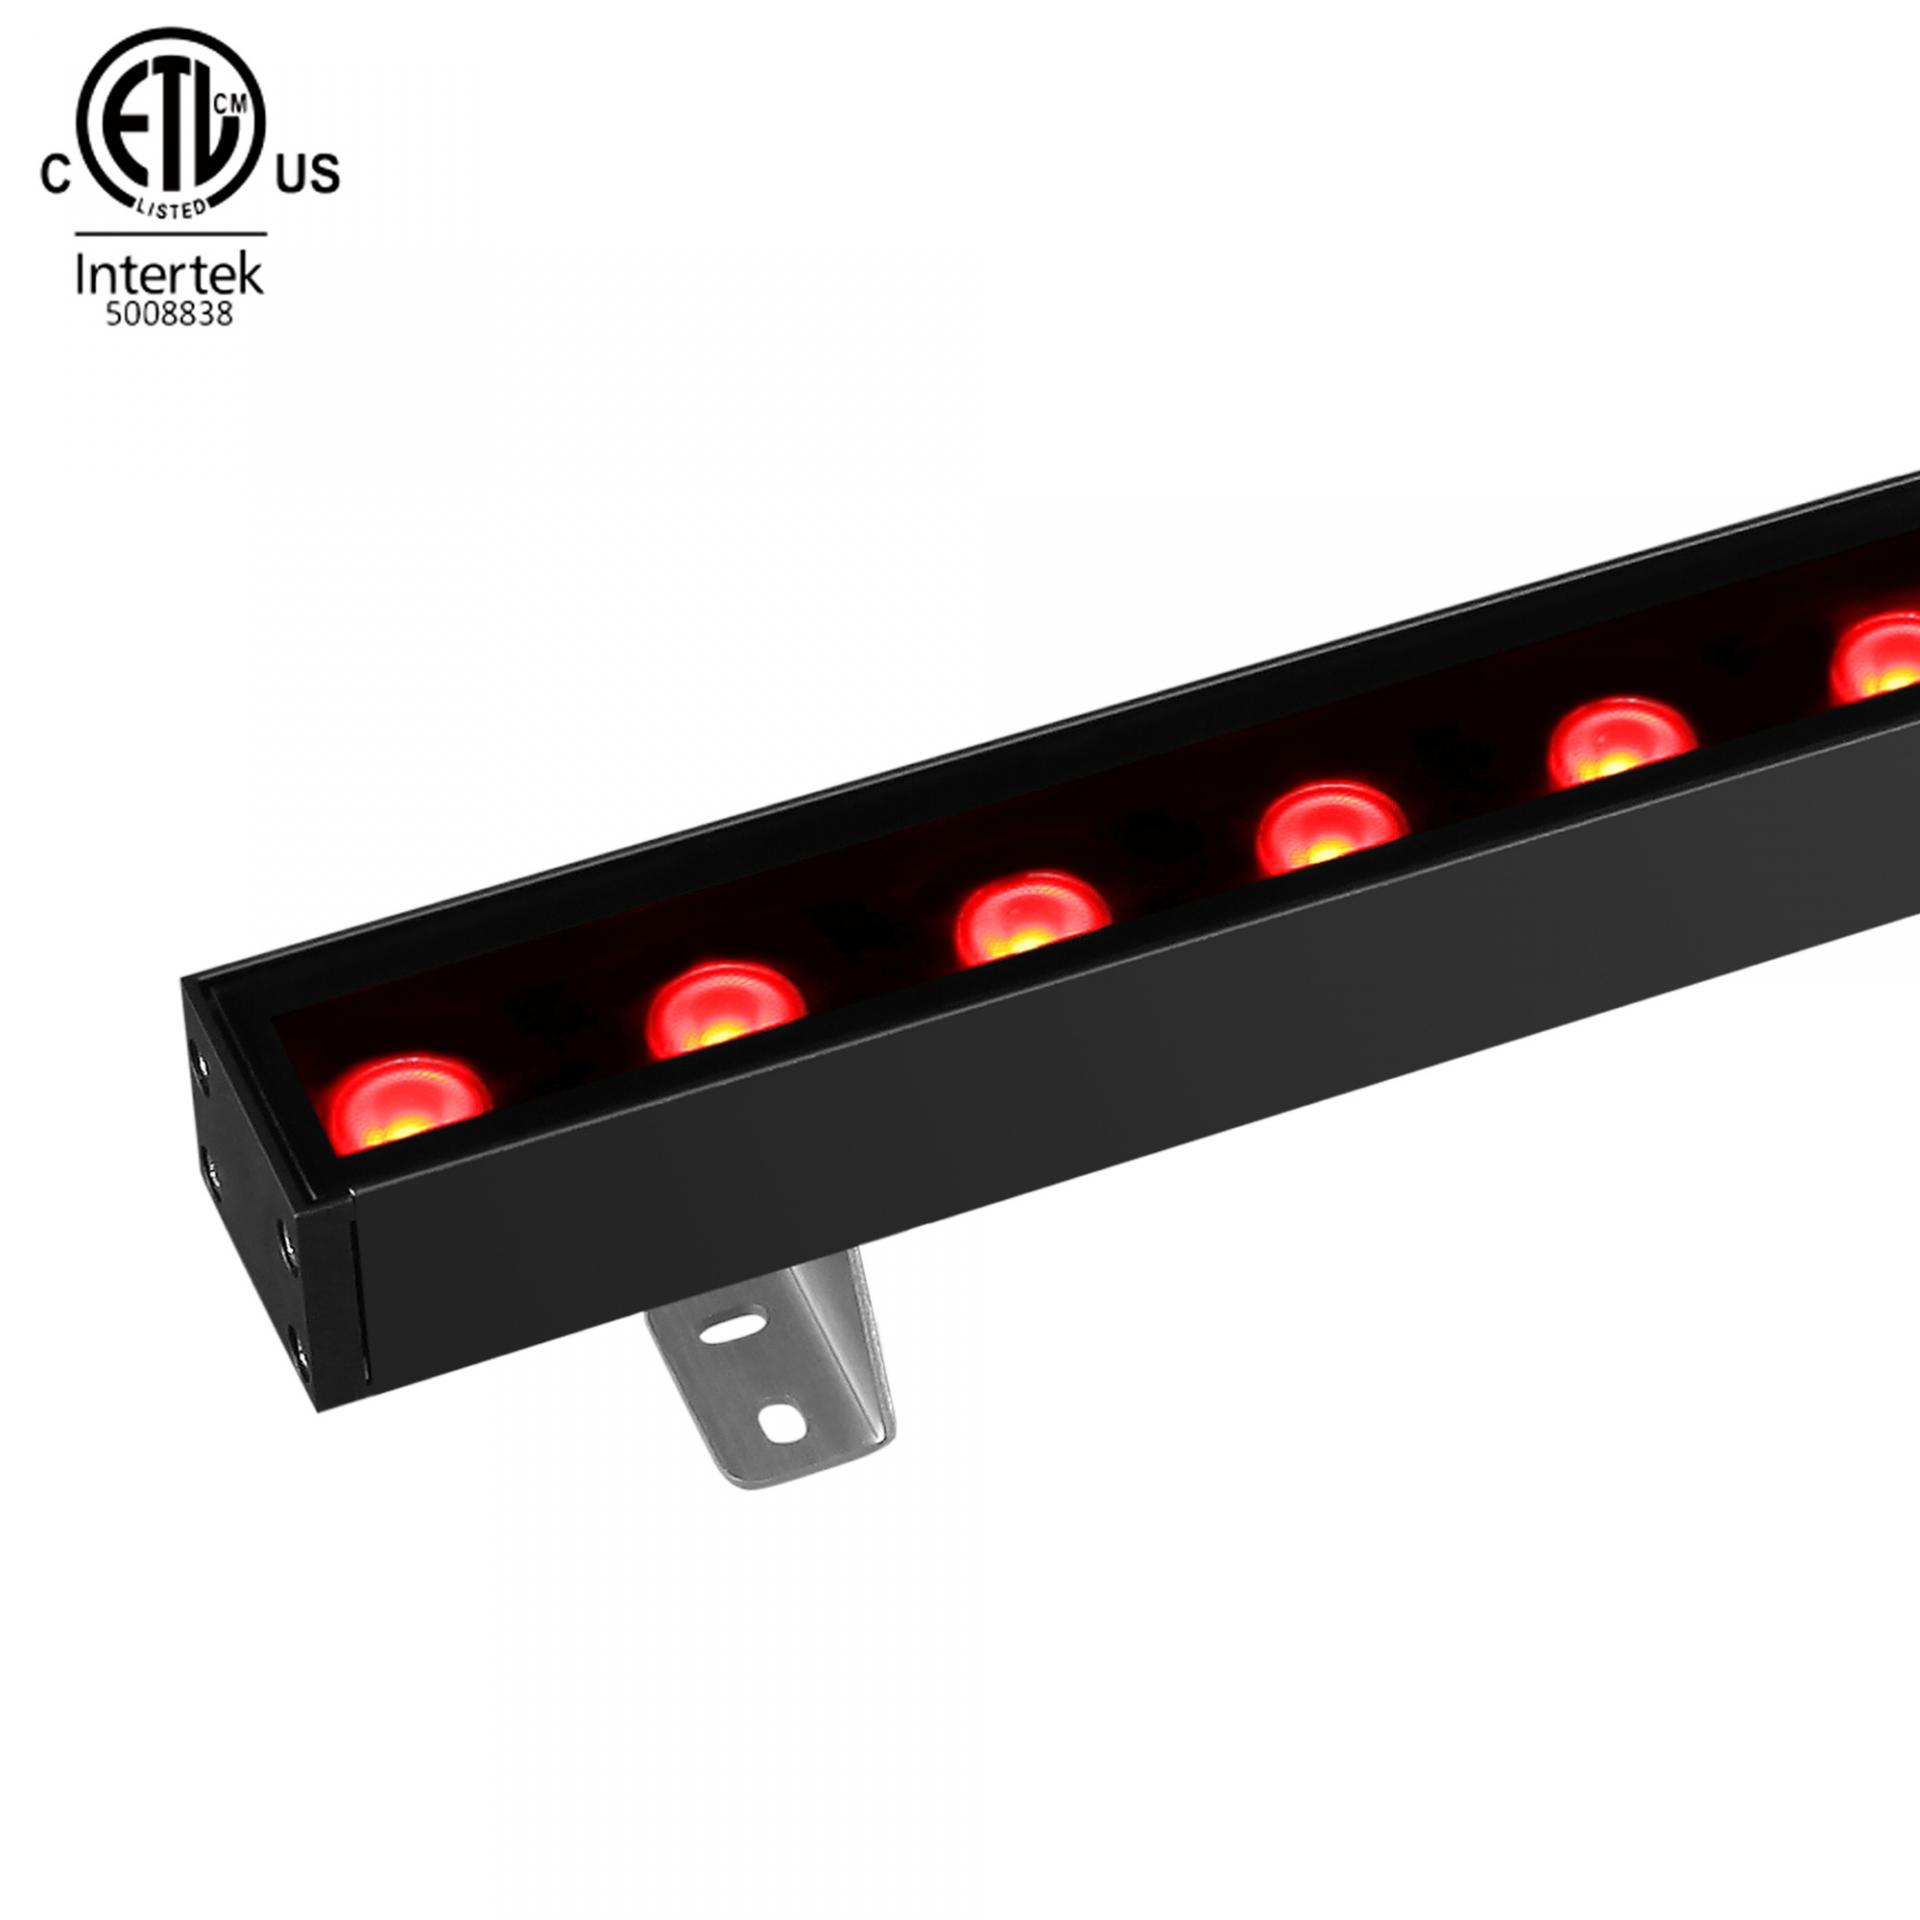 UL ETL Listed 40 inches 50cm lenght 36W RGB RGBW LED Wall Washer